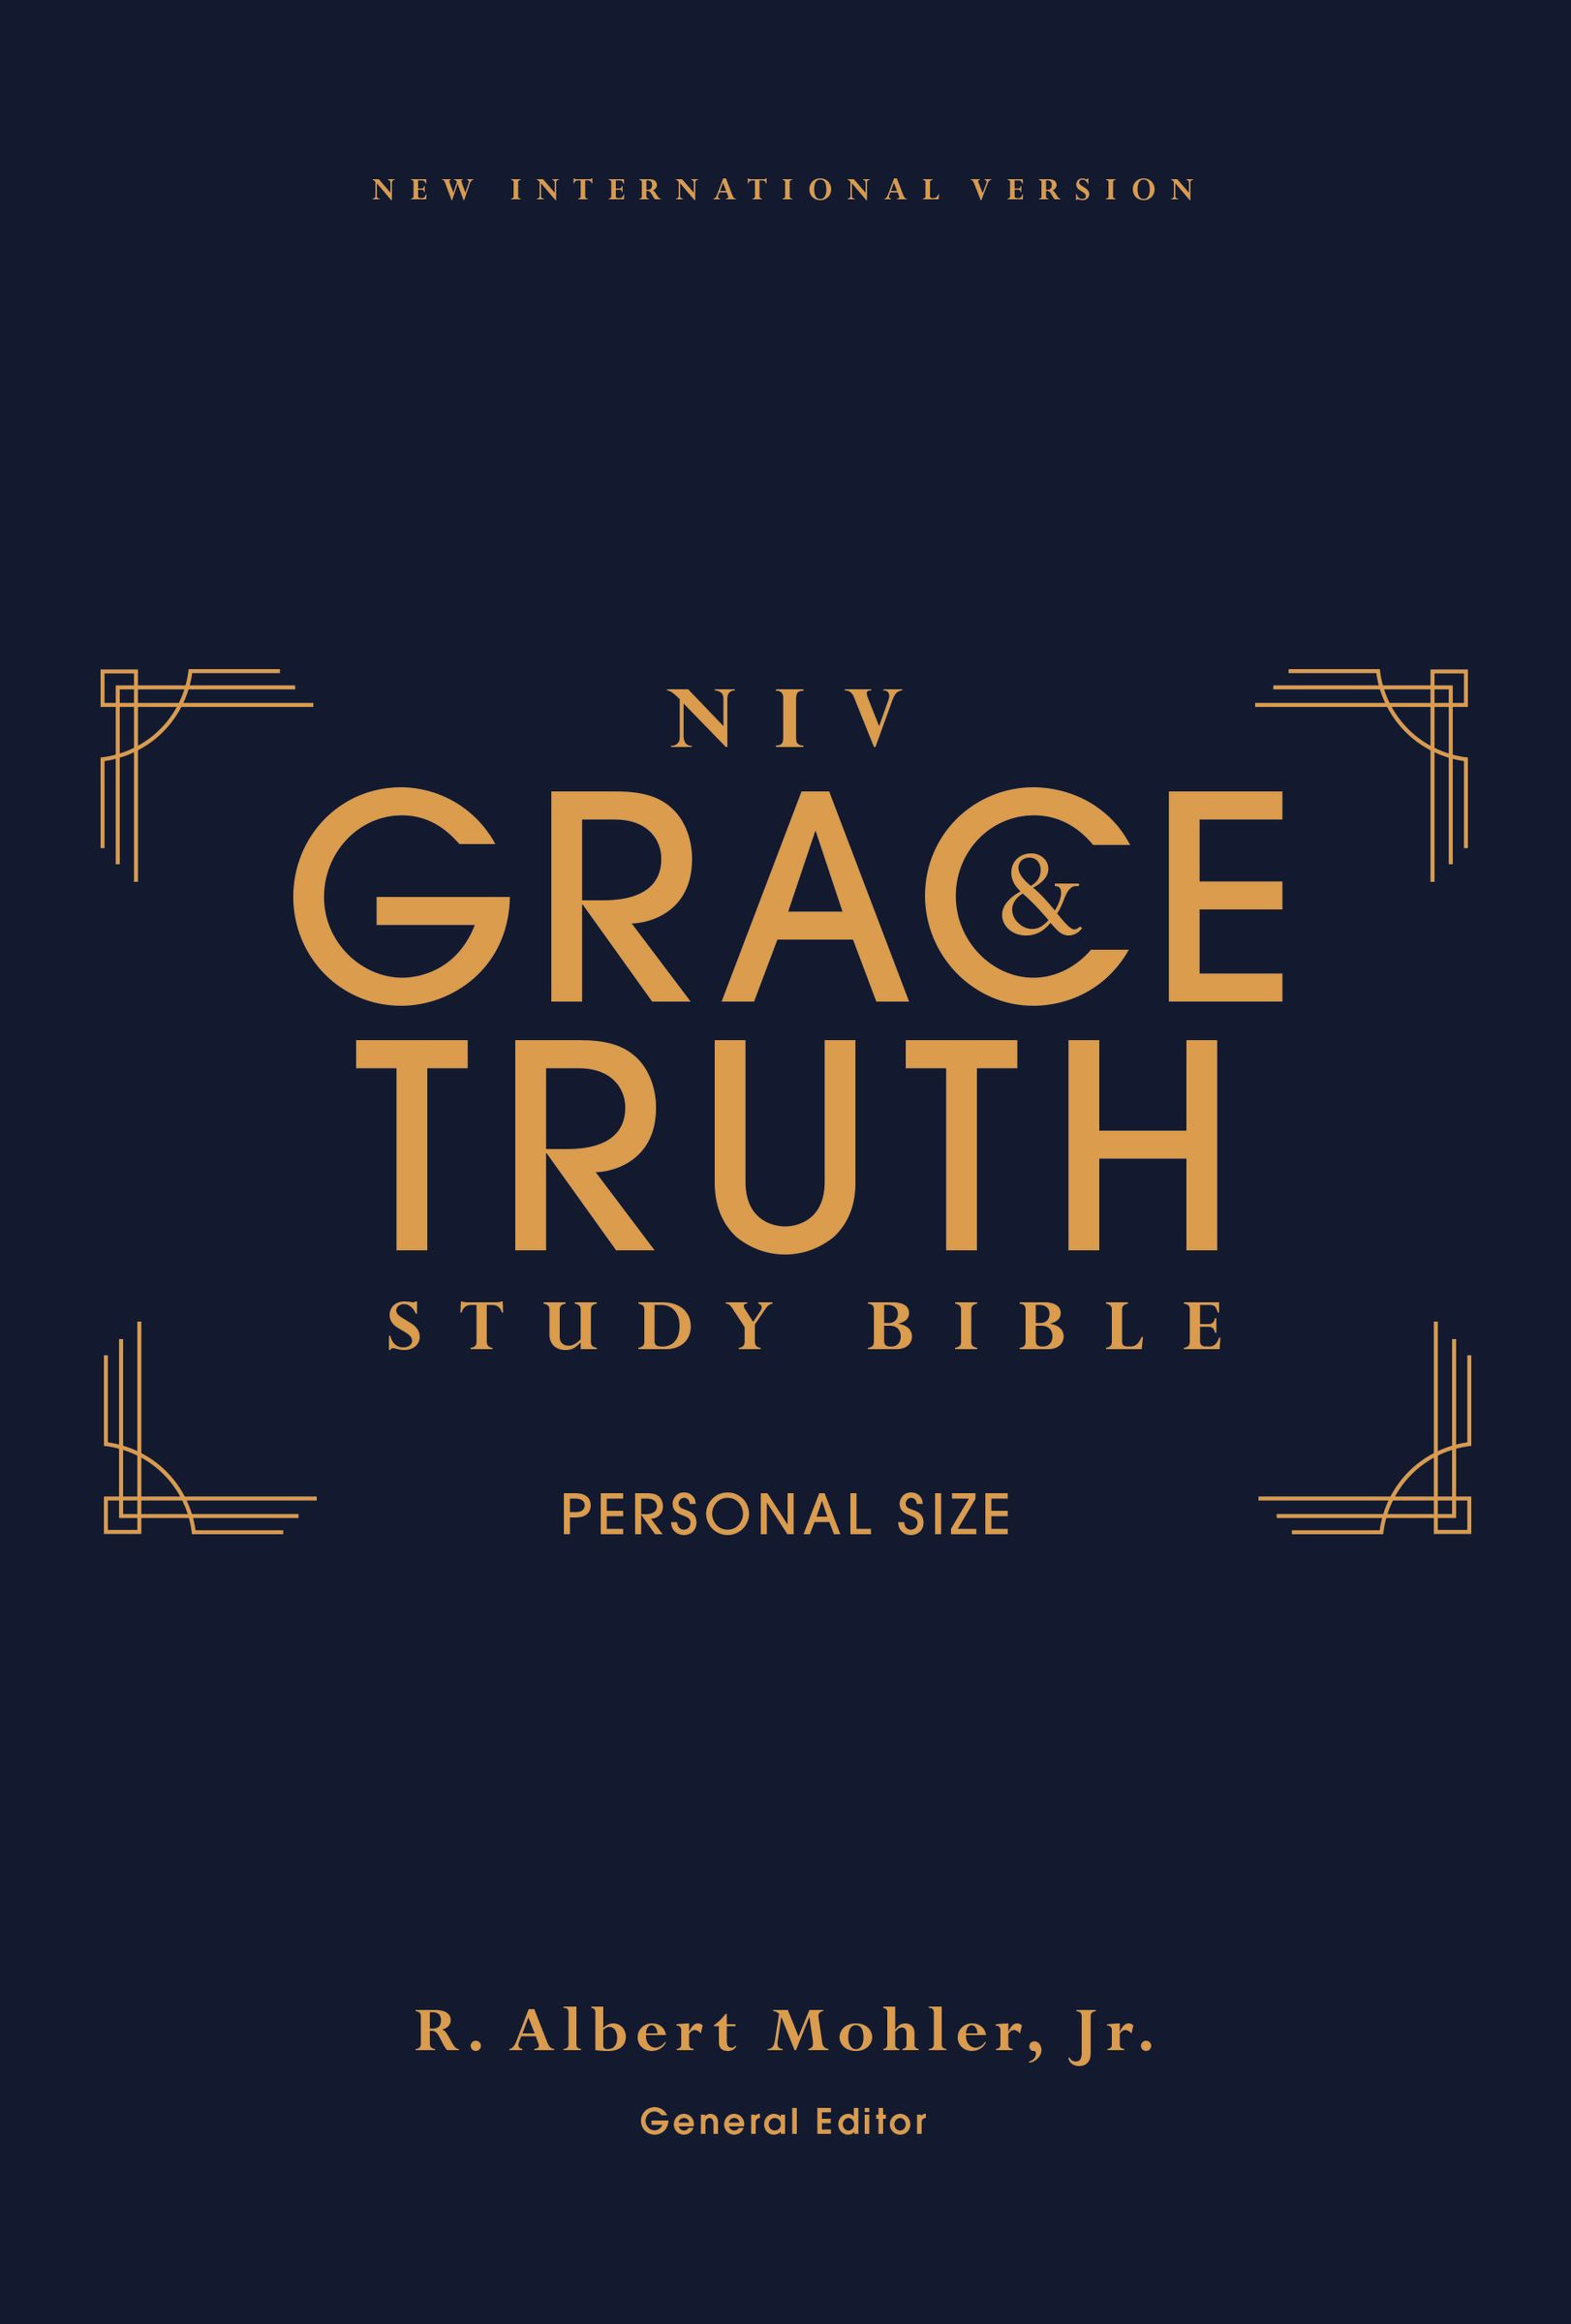 NIV, The Grace and Truth Study Bible, Personal Size, Hardcover, Red Letter, Comfort Print PDF